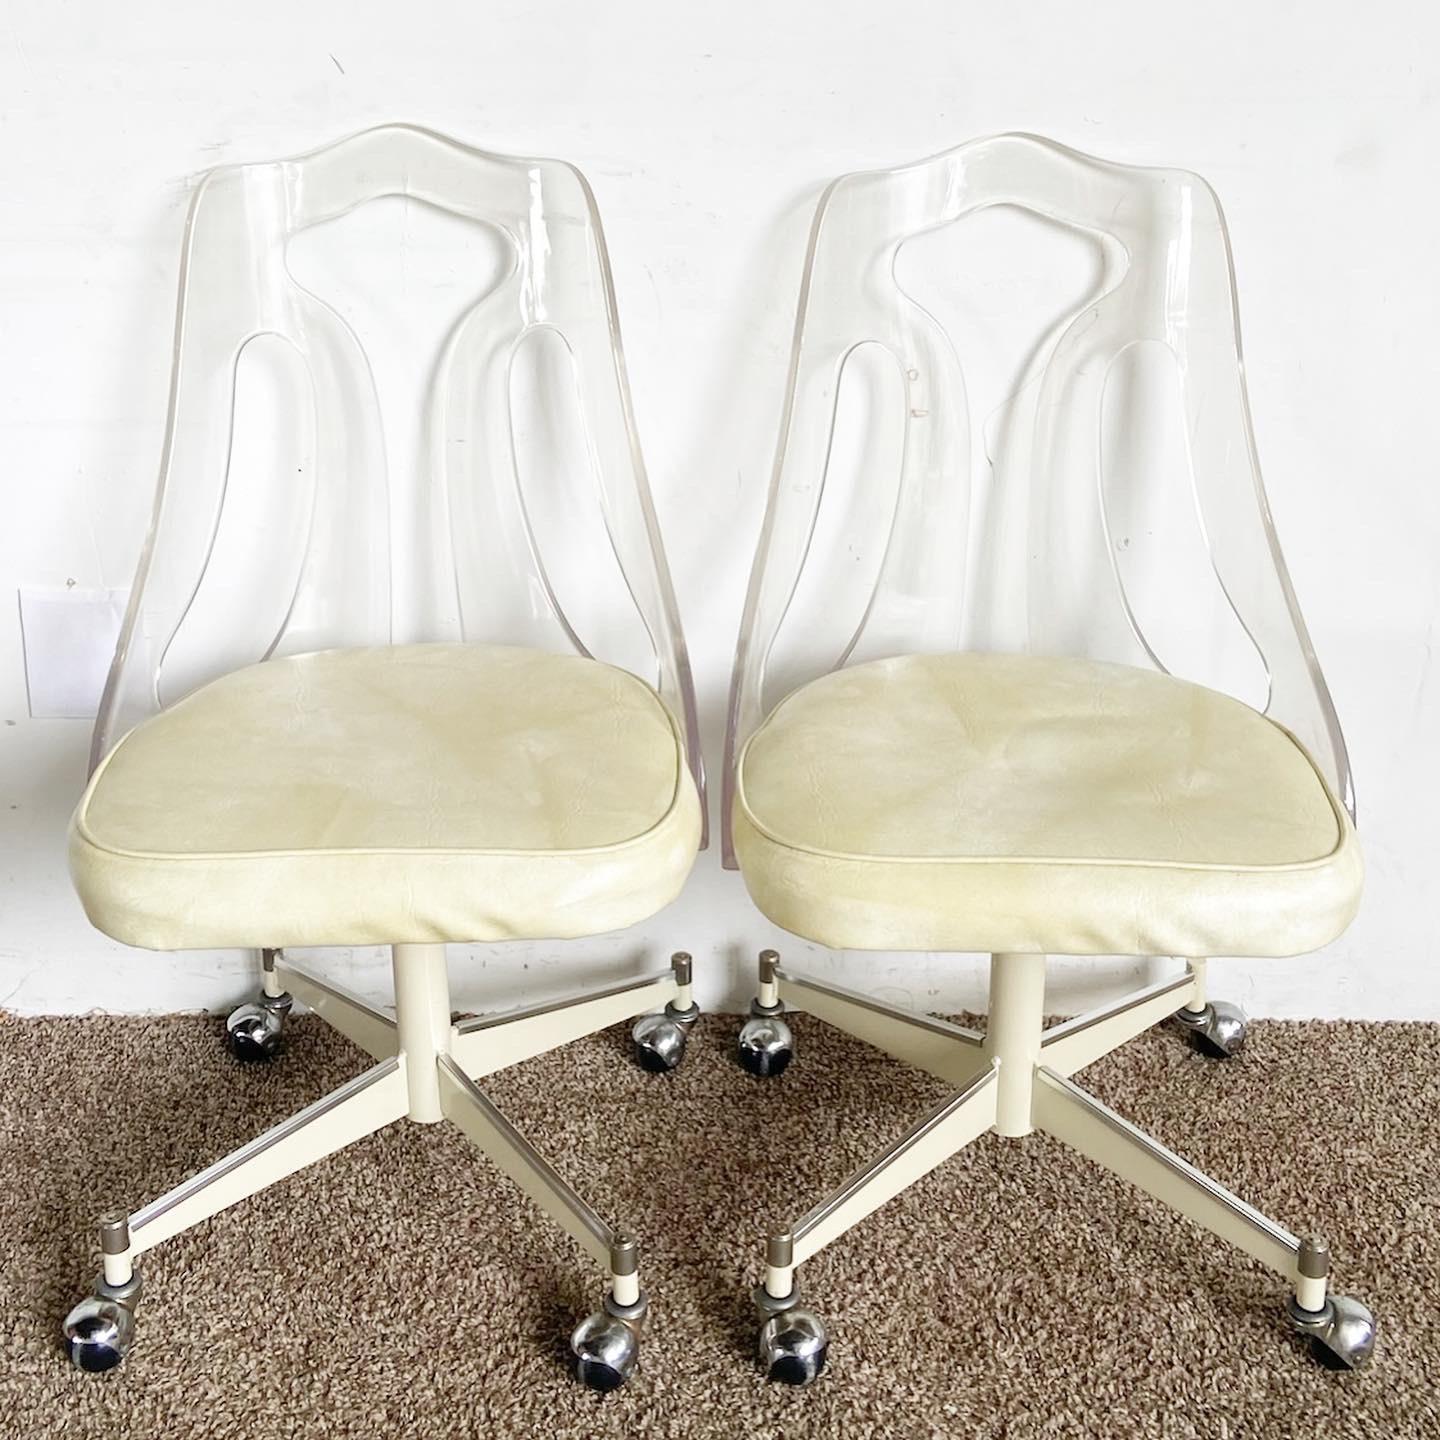 Our set of four Mid Century Modern Lucite Back Cream Cushion and Metal Dining Chairs offers a unique blend of transparent Lucite and plush cream accents.

Features transparent Lucite backs for a unique, modern appeal.
Plush cream cushions provide